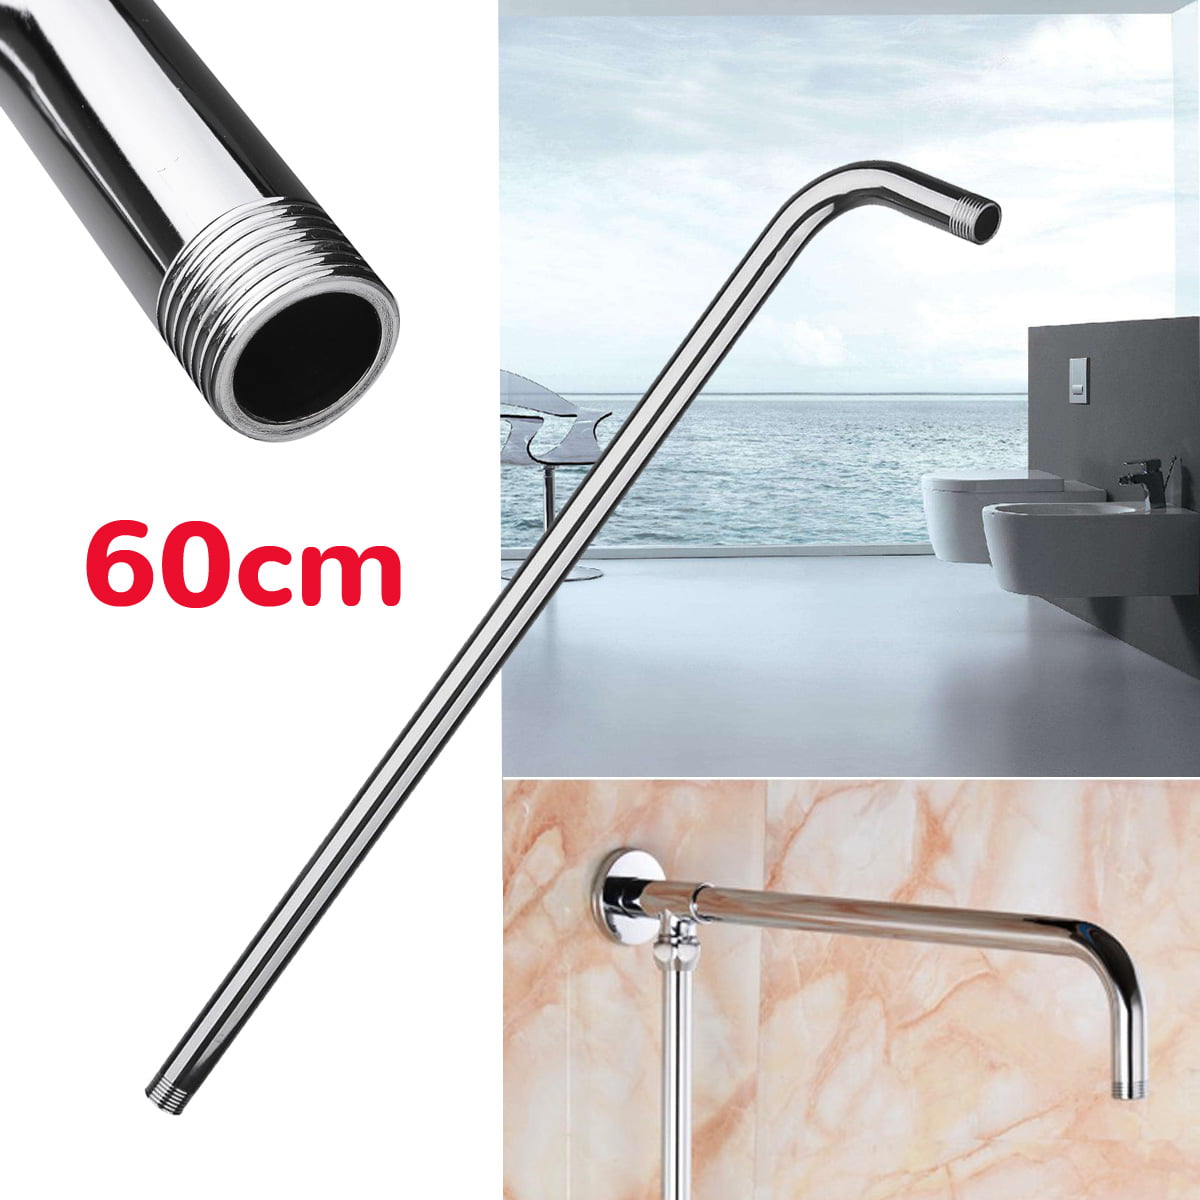 24in 60cm Stainless Steel Rainfall Shower Head Extension Arm Wall Mounted Tube 